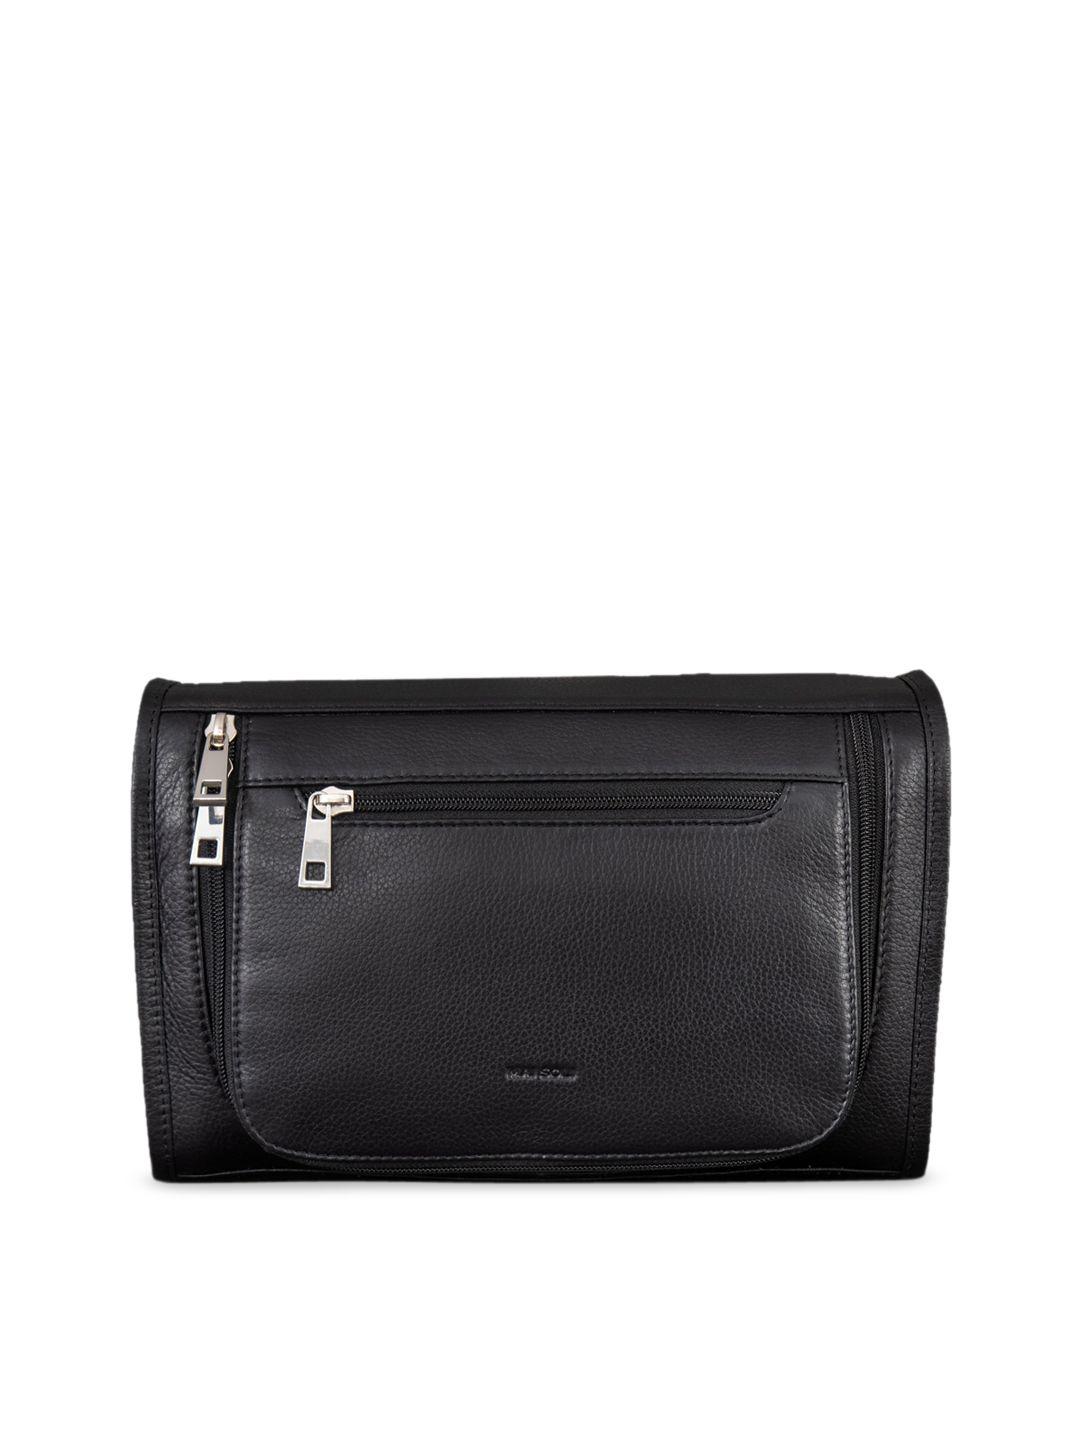 mai soli unisex black solid leather toiletry bag